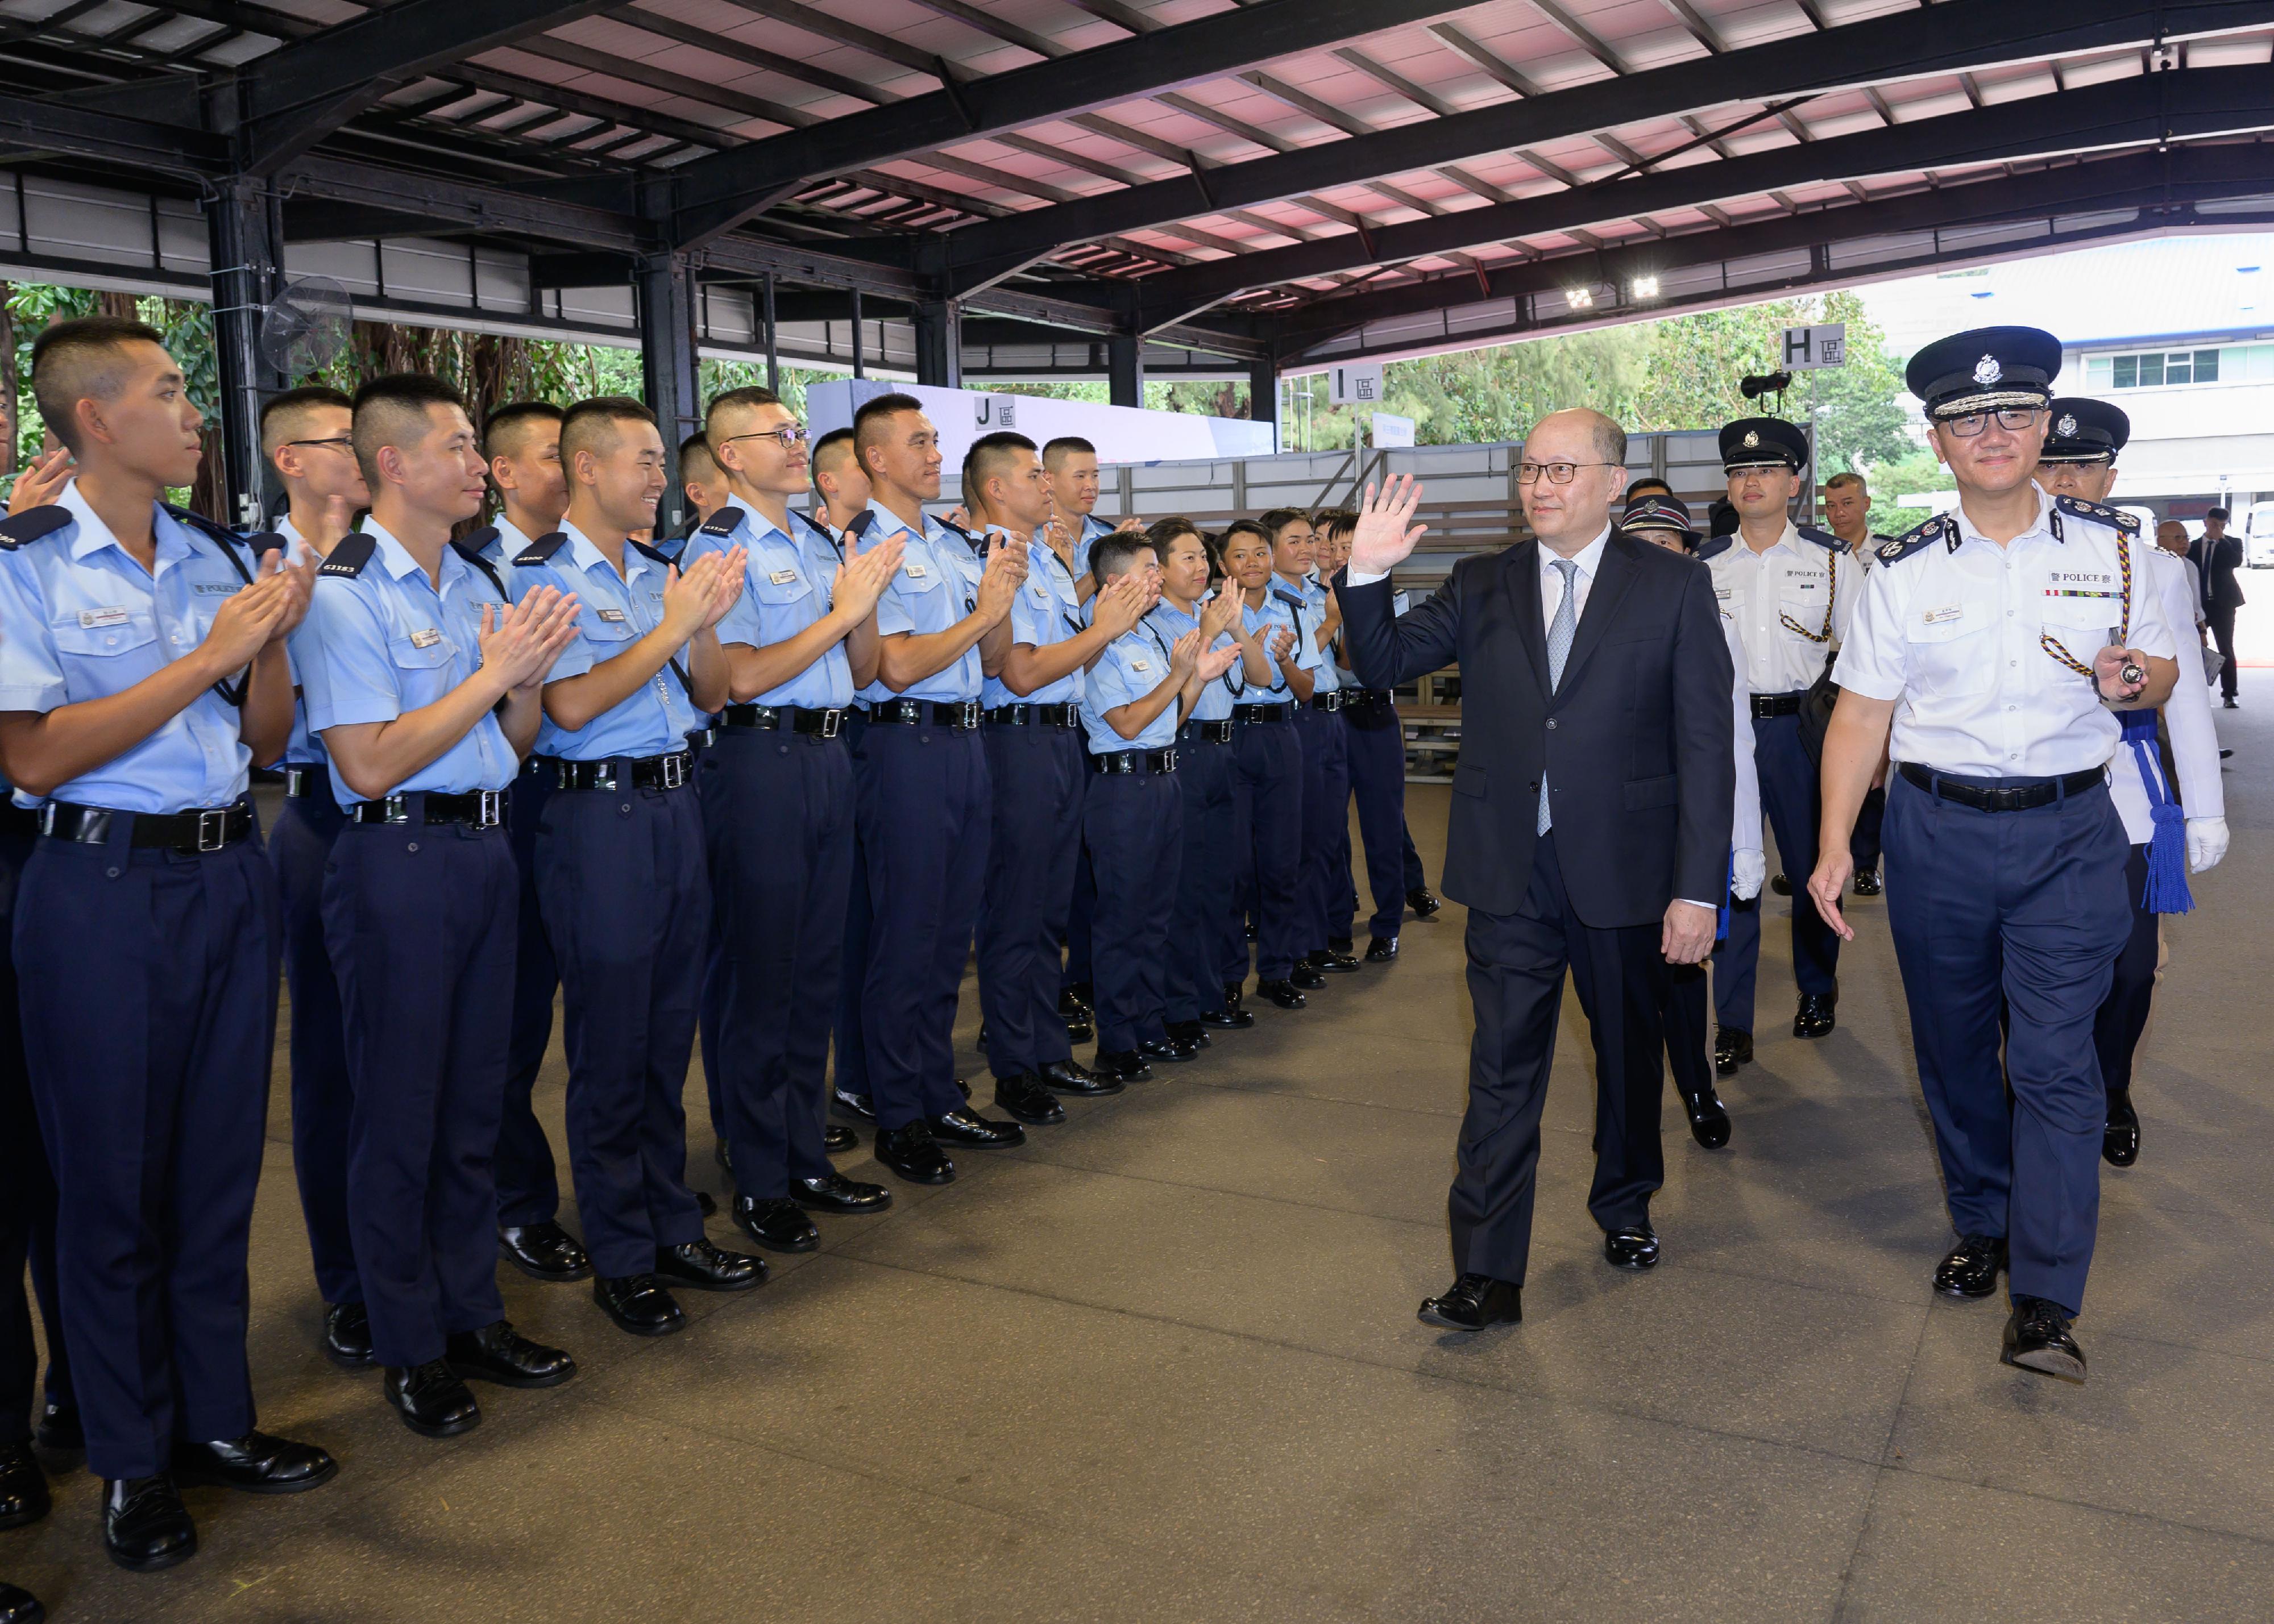 The Director of the Liaison Office of the Central People's Government in the Hong Kong Special Administrative Region, Mr Zheng Yanxiong (front row, second right), accompanied by the Commissioner of Police, Mr Siu Chak-yee (front row, first right), meets graduates after the passing-out parade held at the Hong Kong Police College today (September 16).